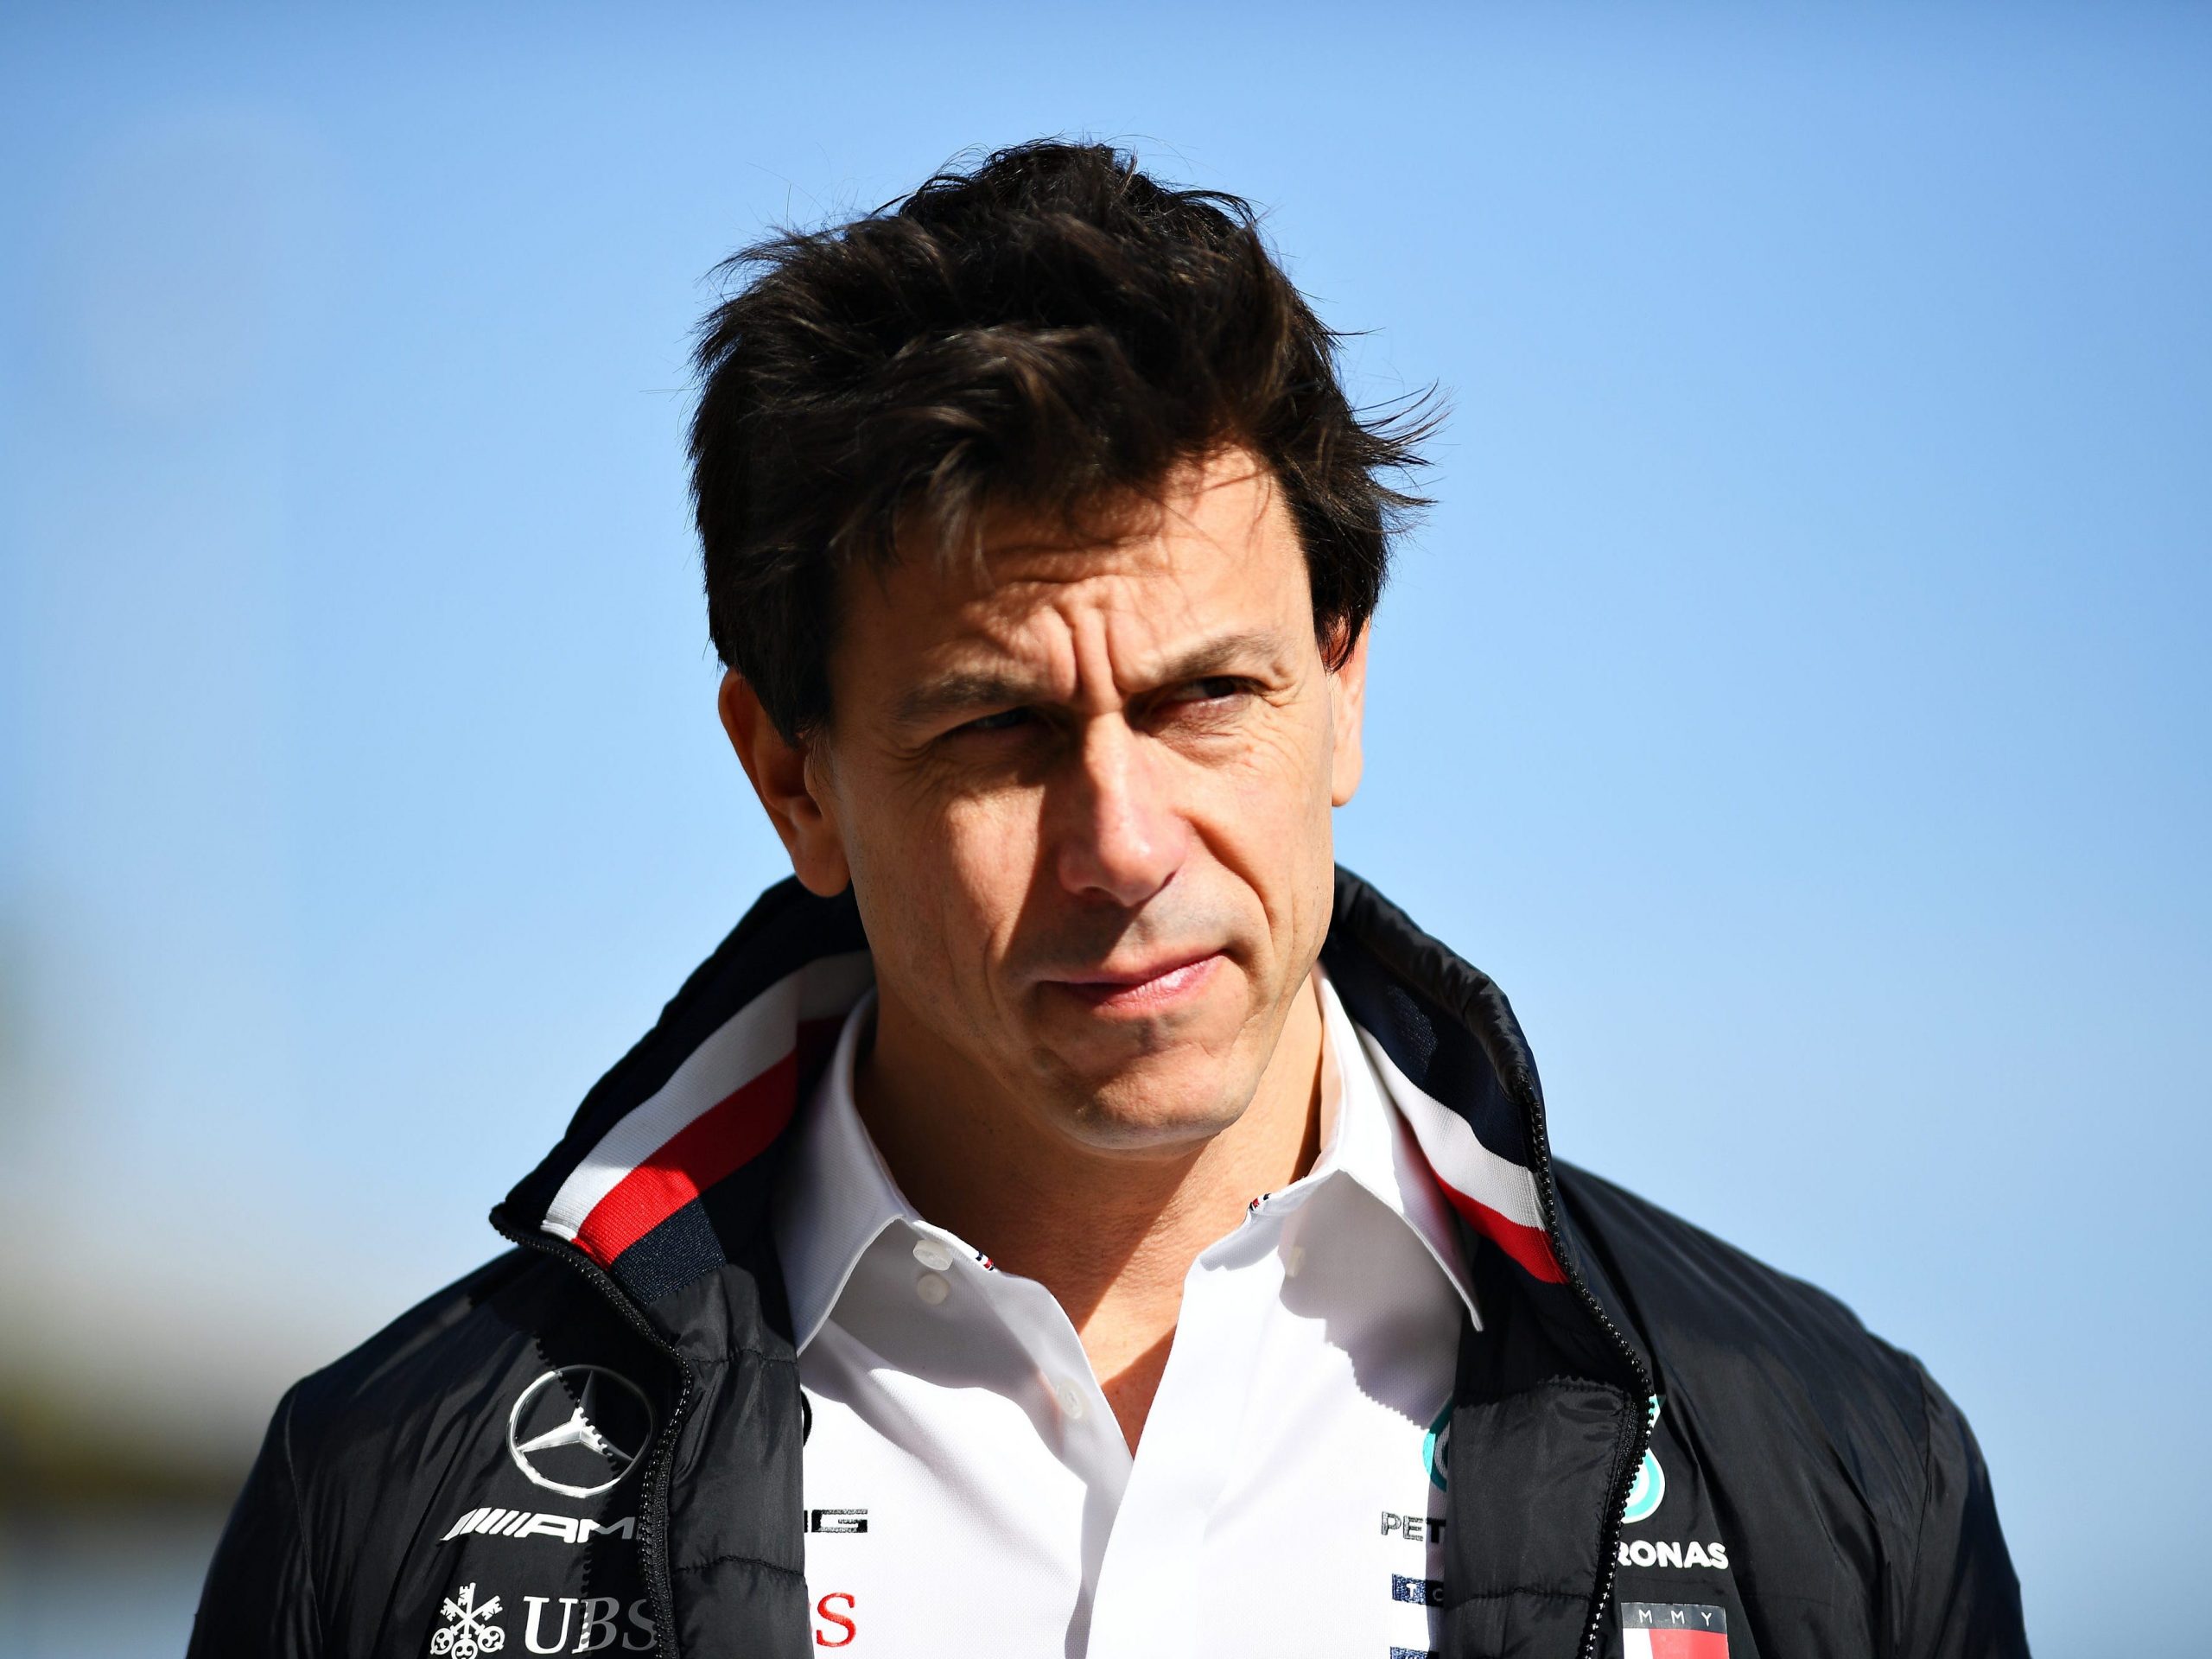 How childhood trauma and humiliation shaped Mercedes boss Toto Wolff into the most successful manager in F1 history